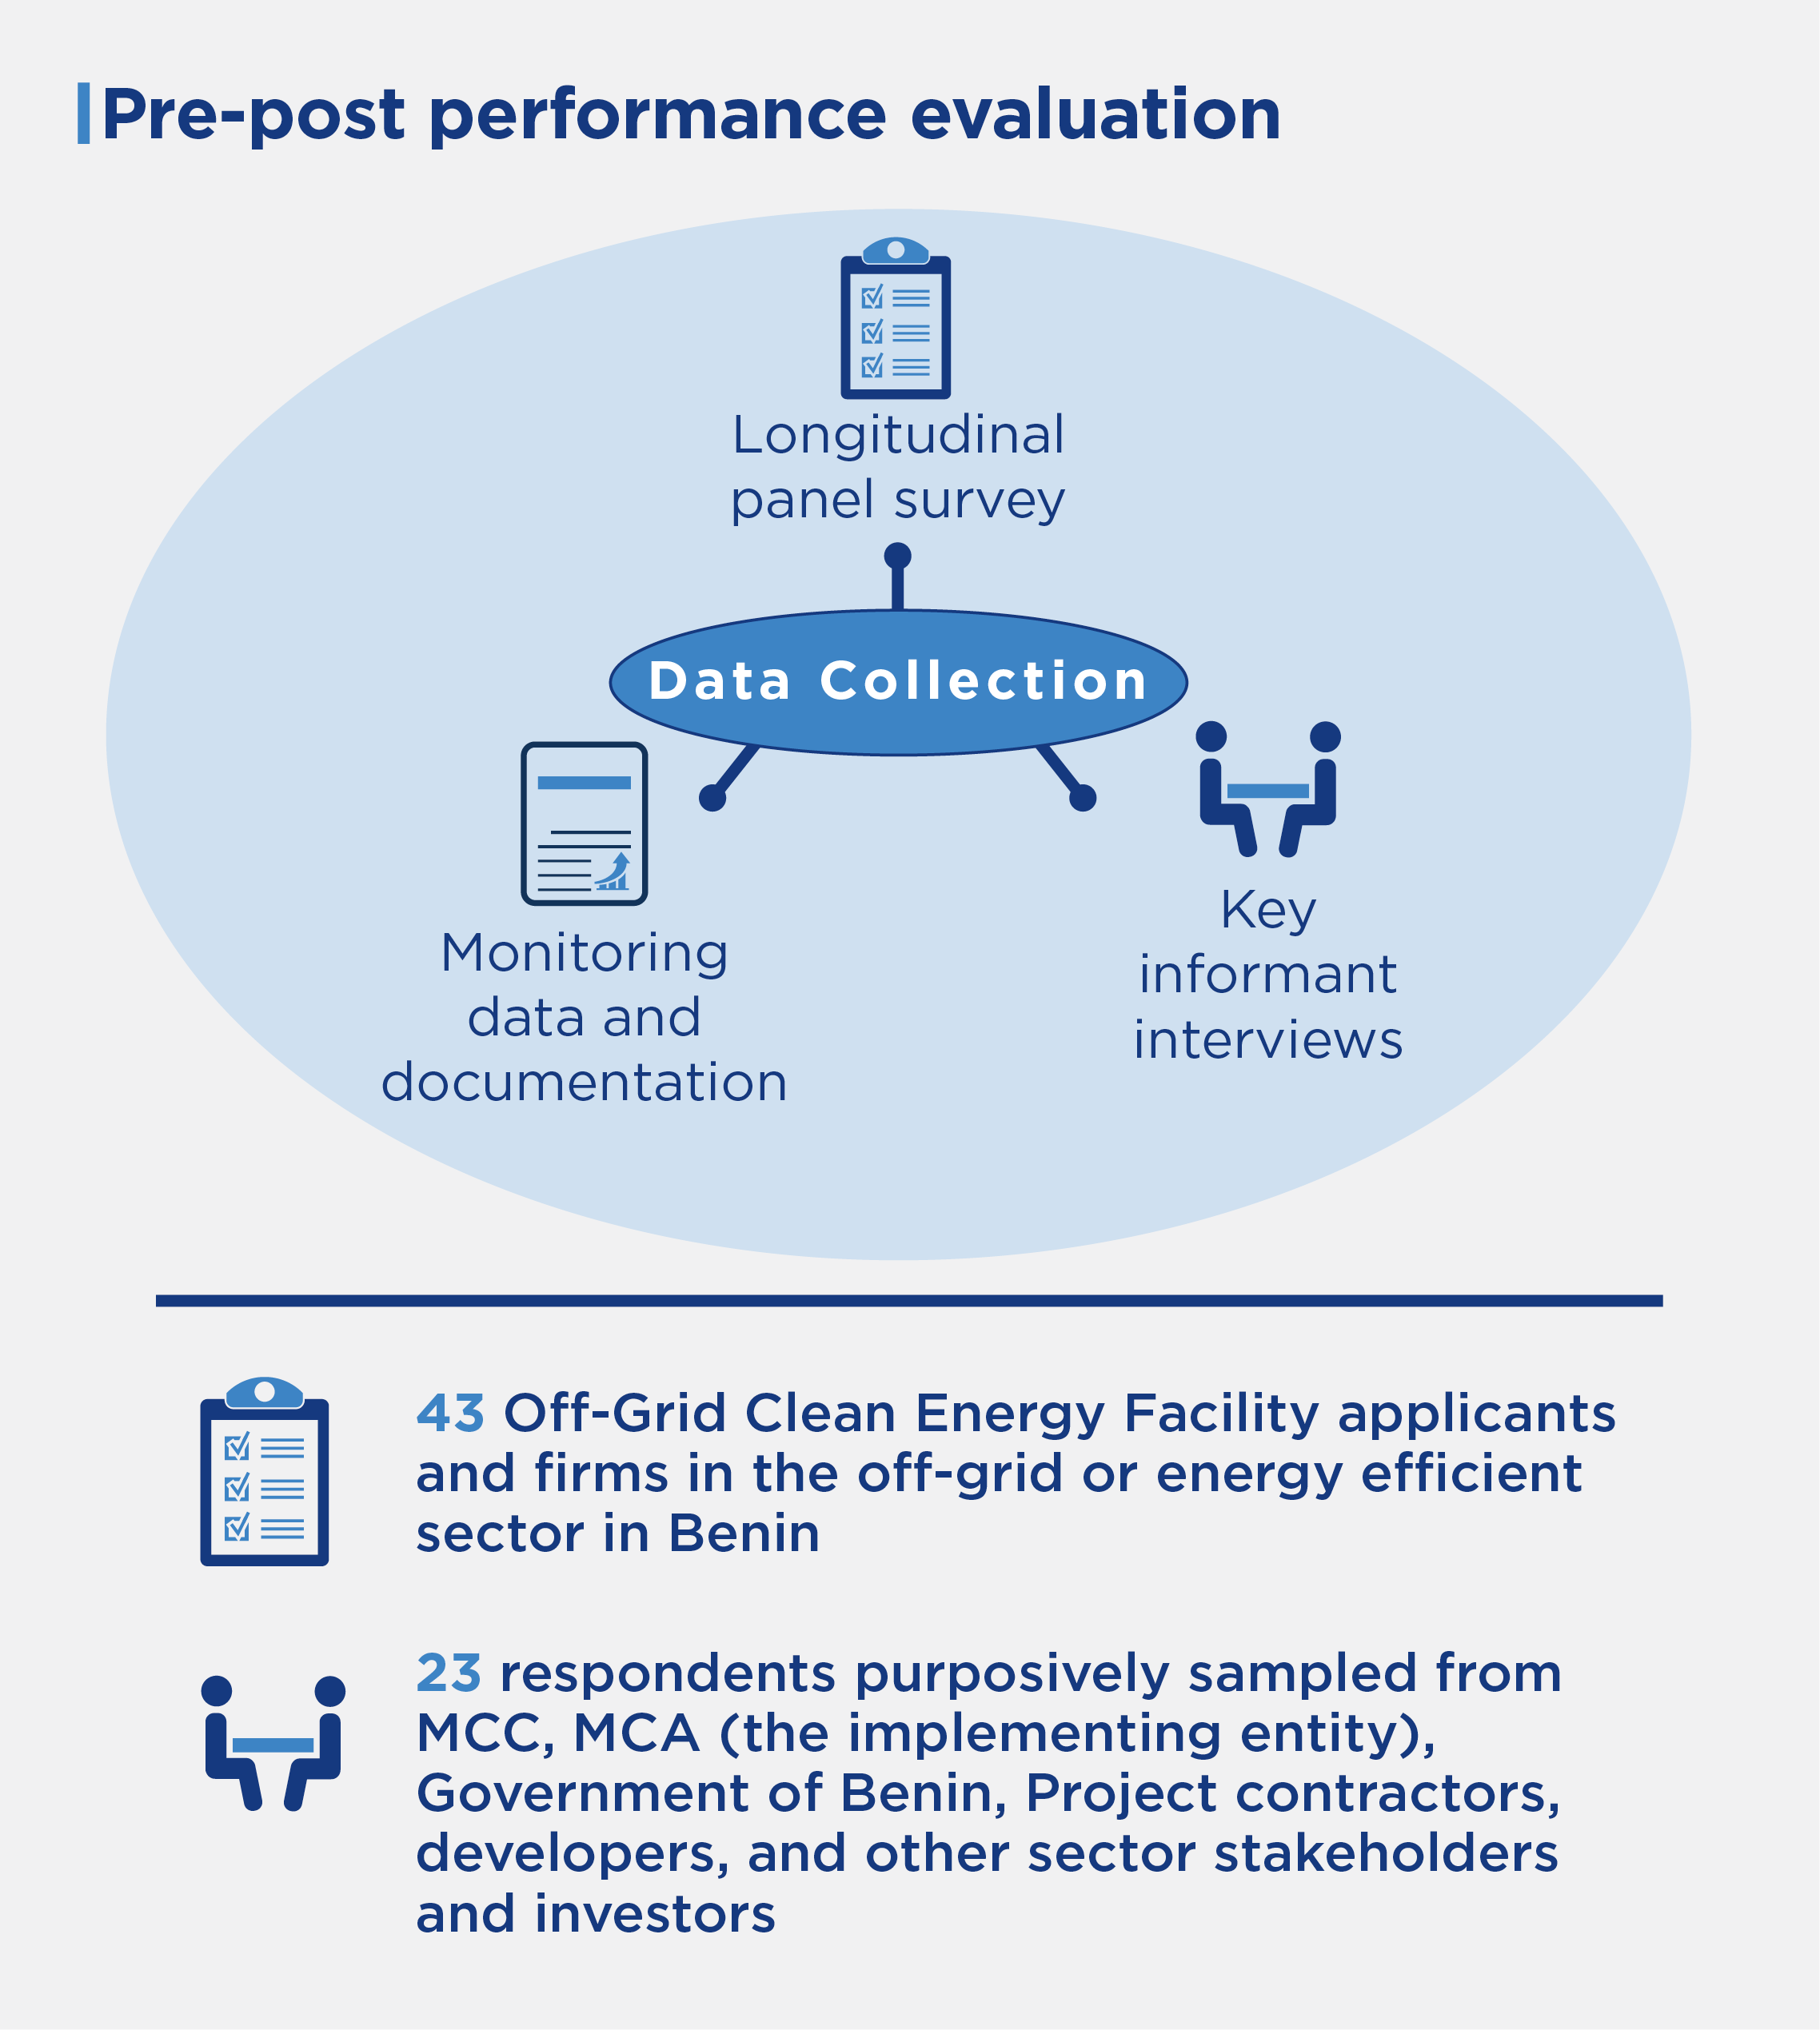 This pre-post performance evaluation included data collection from a longitudinal panel survey; monitoring data and documentation, and key informant interviews. The survey respondents included 43 Off-Grid Clean Energy Facility applicants and firms in the off-grid or energy efficient sector in Benin. The key informant interviews included 23 respondents purposively sampled from MCC, MCA (the implementing entity), Government of Benin, Project contractors, developers, and other sector stakeholders and investors
